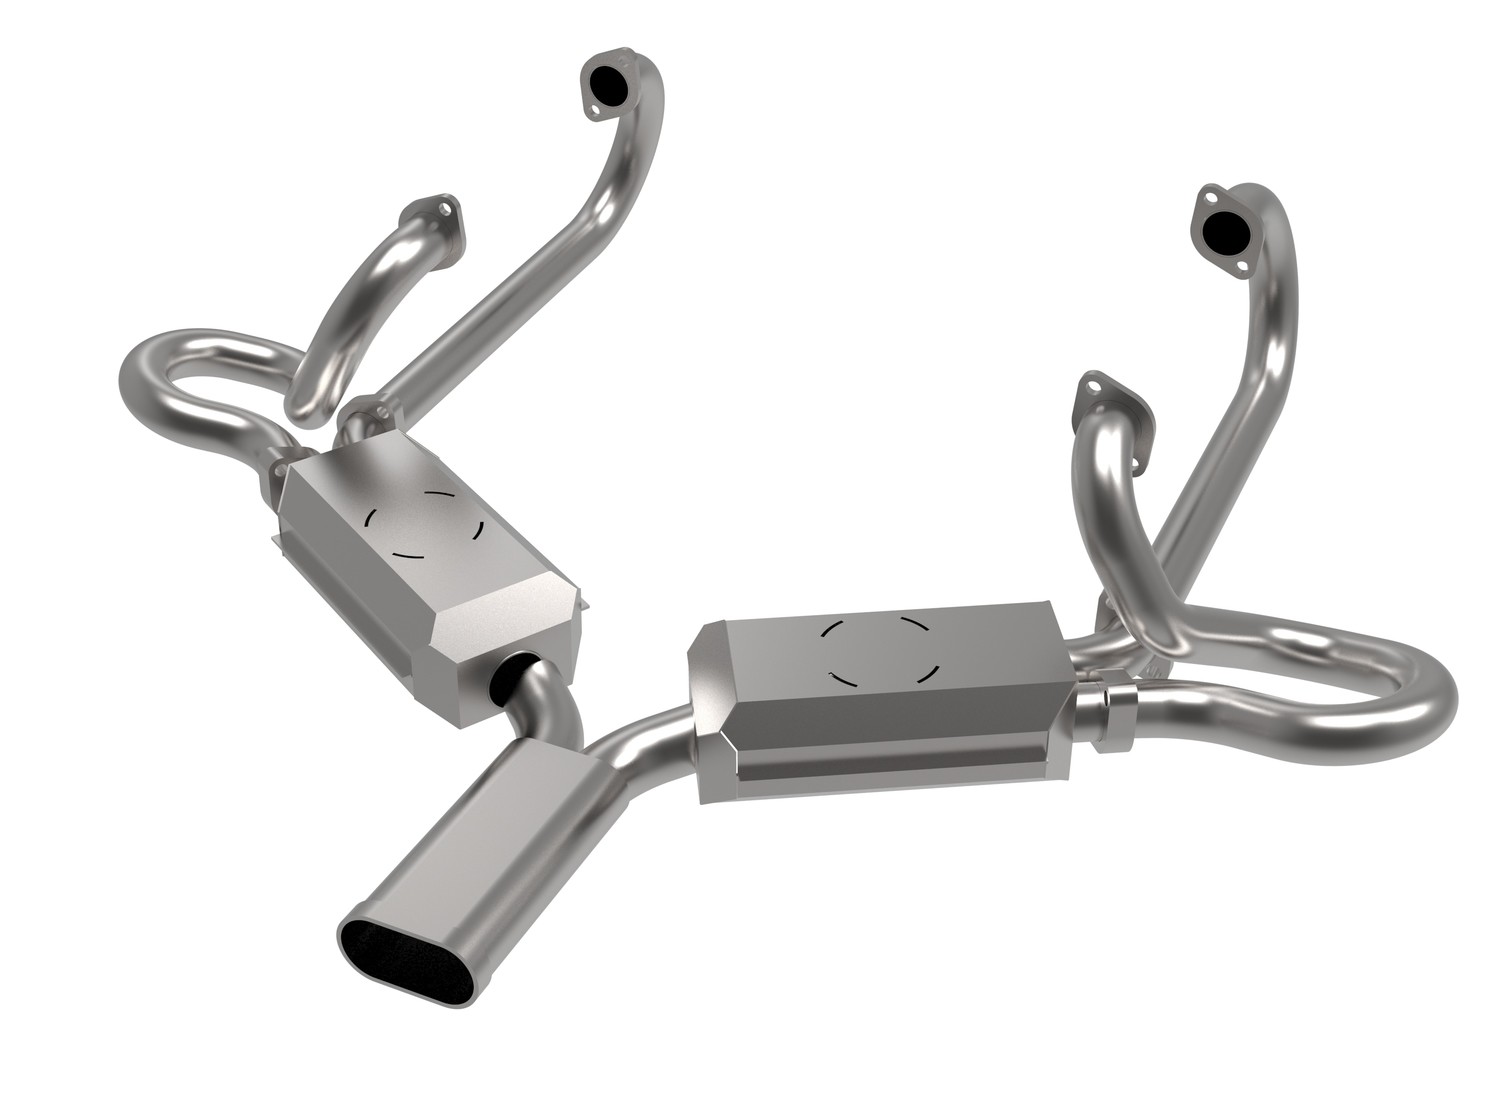 TYPE 1 1300 ~ 1600, QUIET SEBRING STYLE EXHAUST SYSTEM